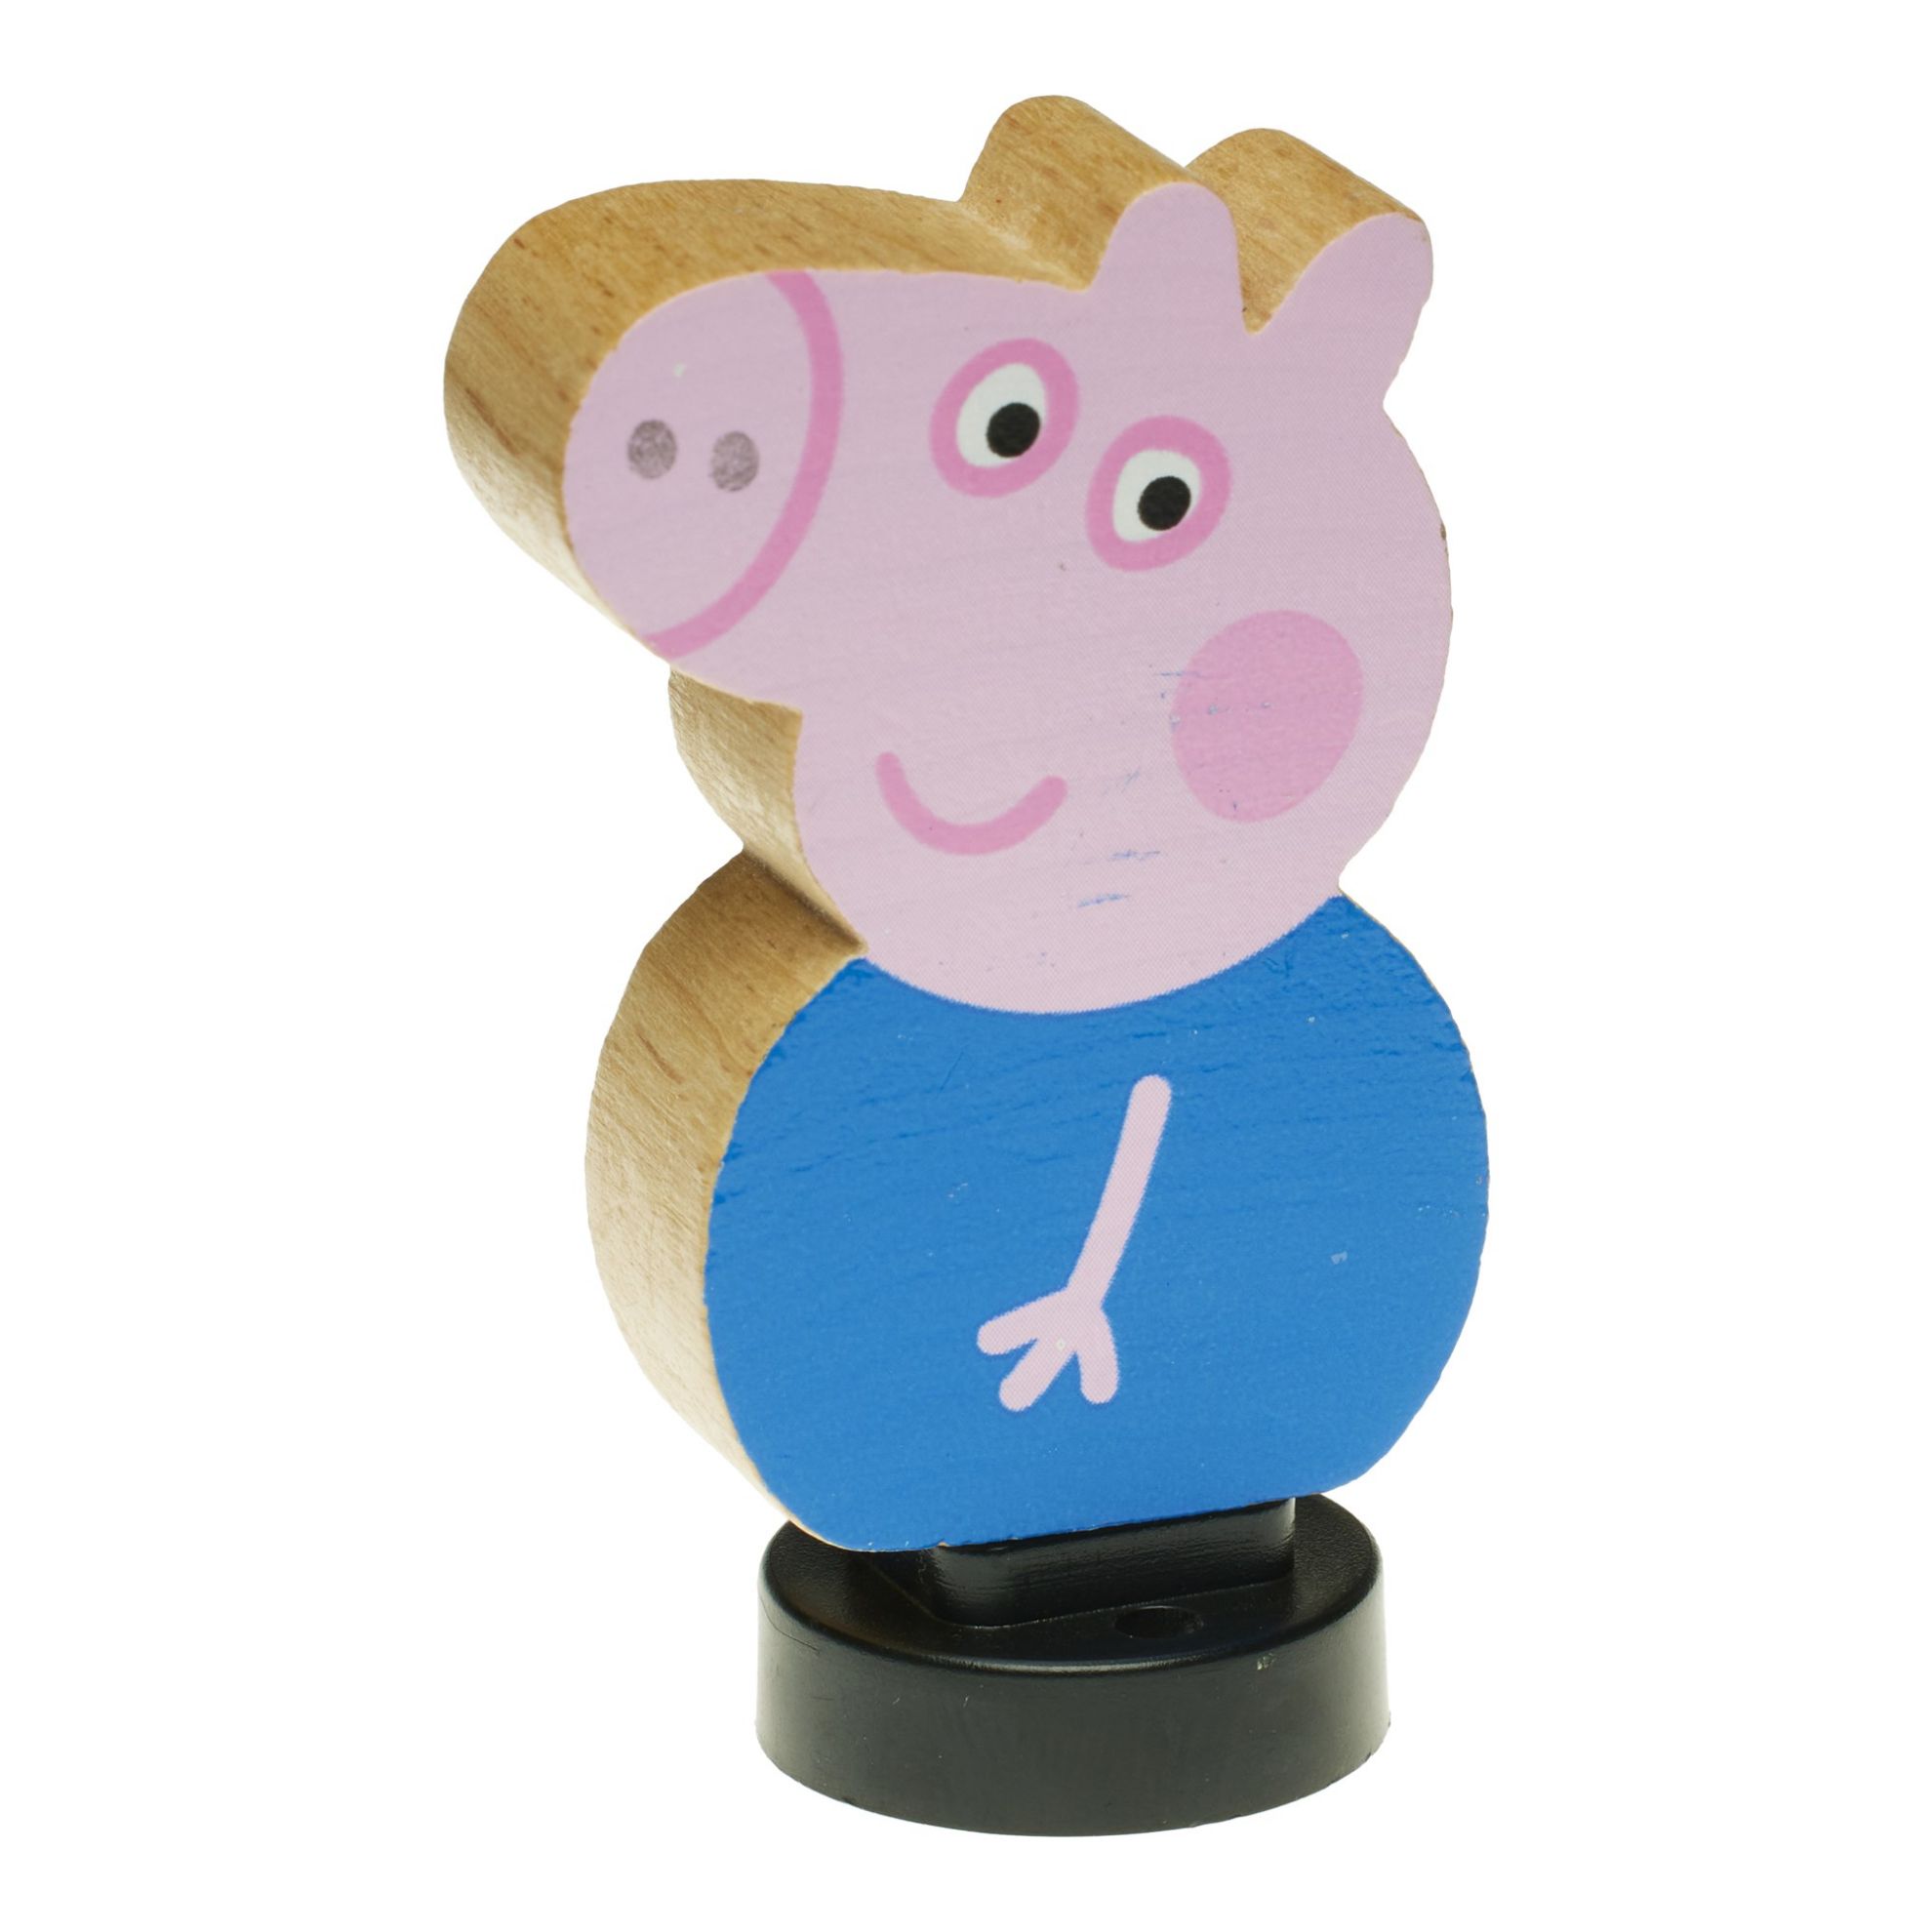 Picture of Spare Parts - Peppa Pig's Wooden Family Home - Wooden George Figure